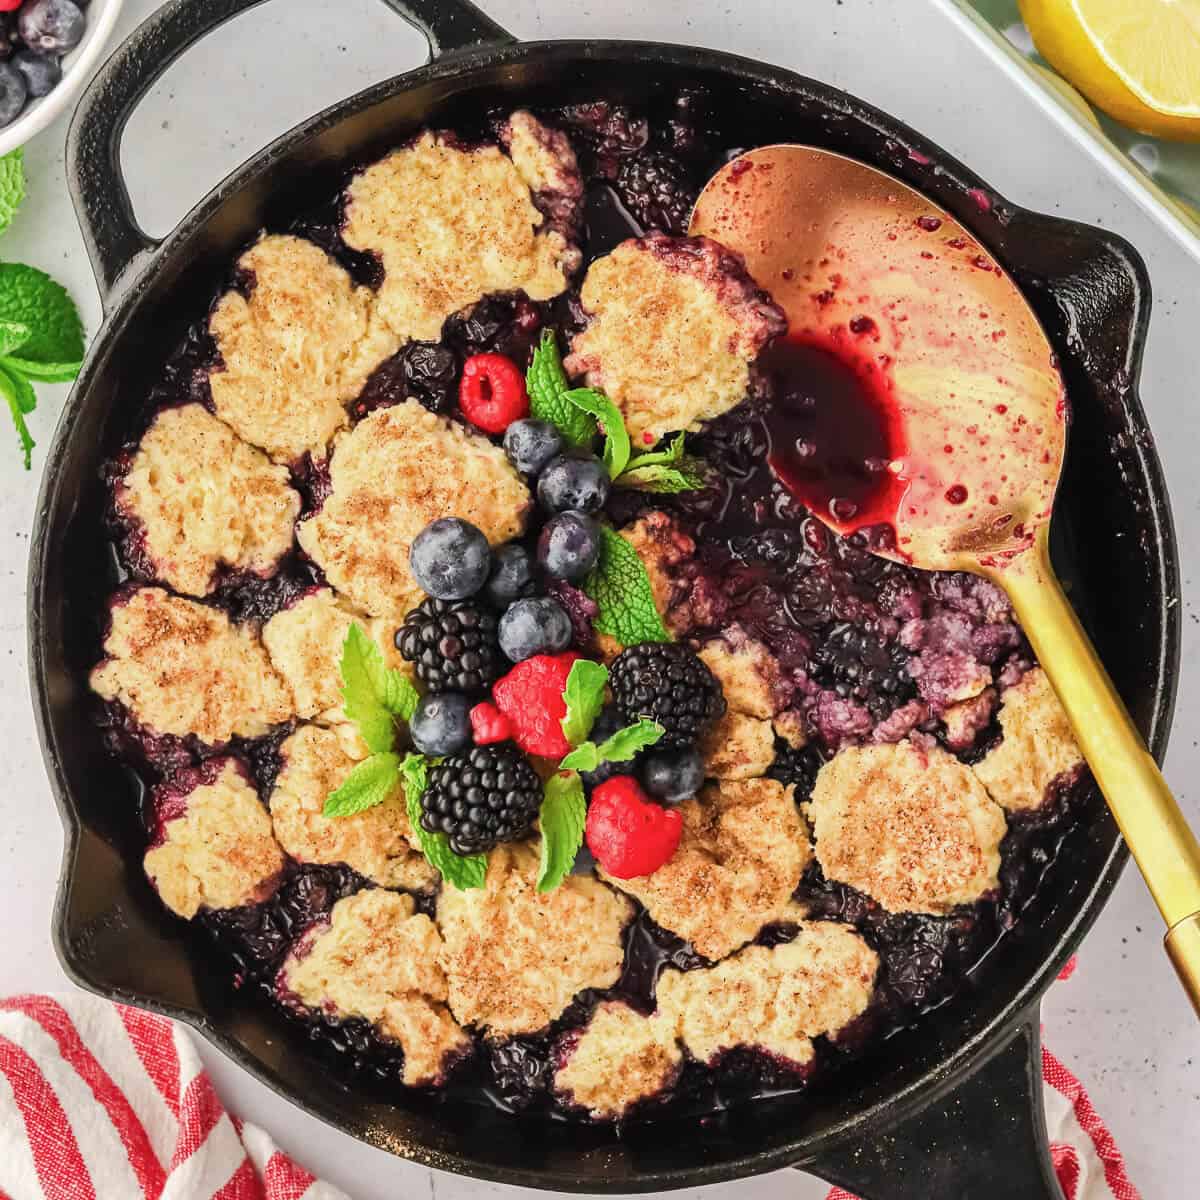 Mixed Berry Cobbler in a cast iron skillet with a scoop missing and a gold serving spoon laying on the side. The cobbler is garnished with fresh berries and mint leaves. There is plated cobbler, gold spoons, berries and lemons surrounding the skillet.